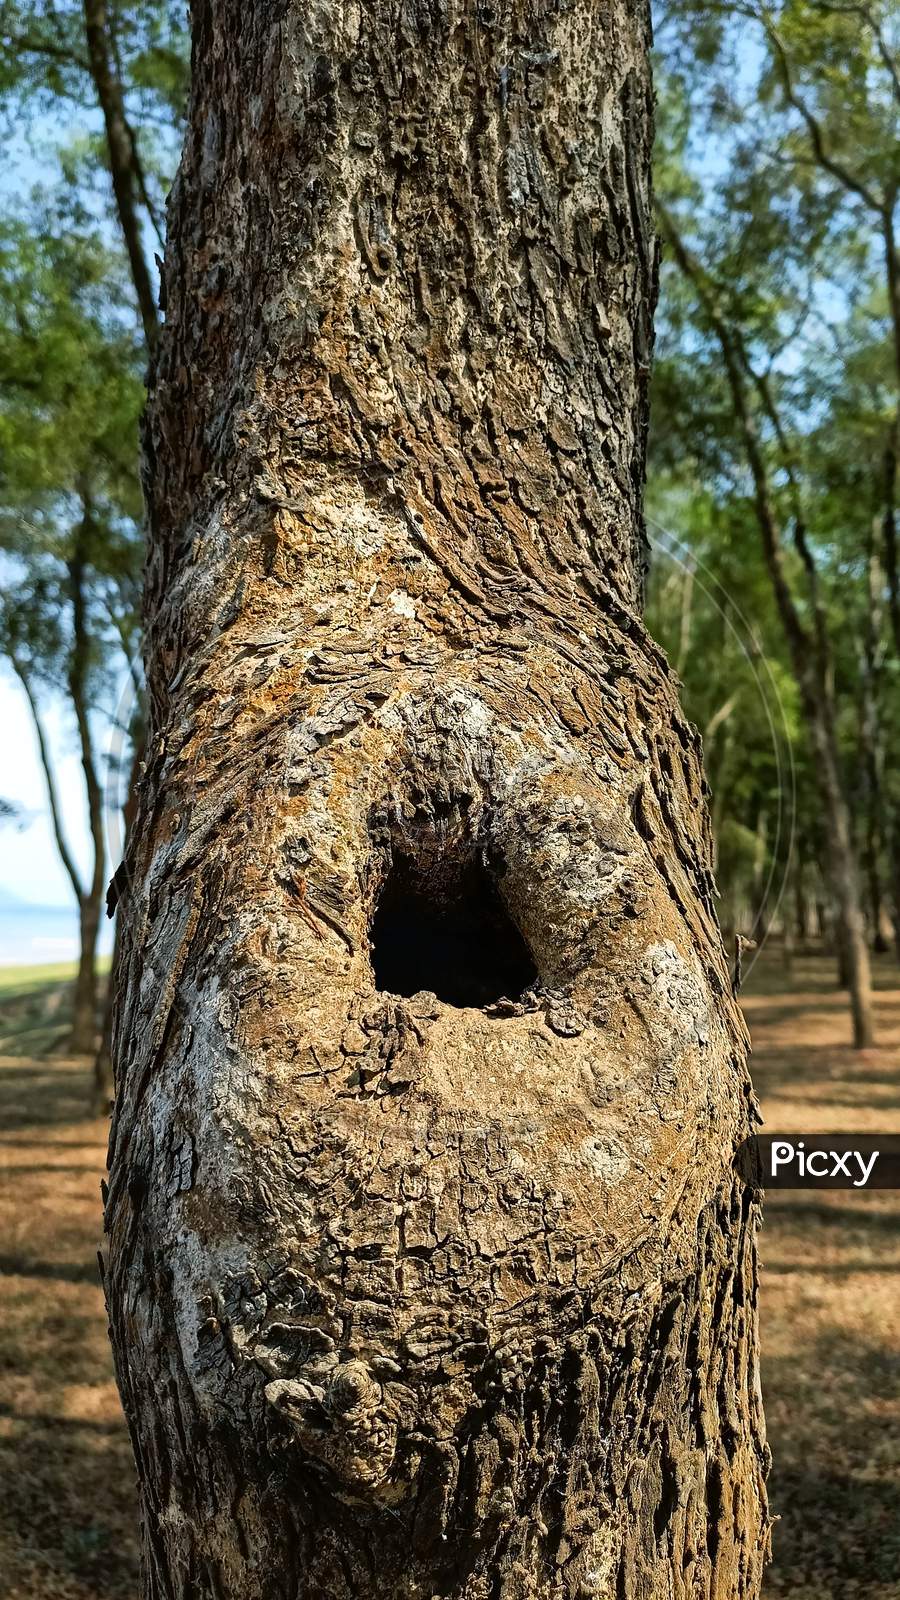 Cave on tree trunk